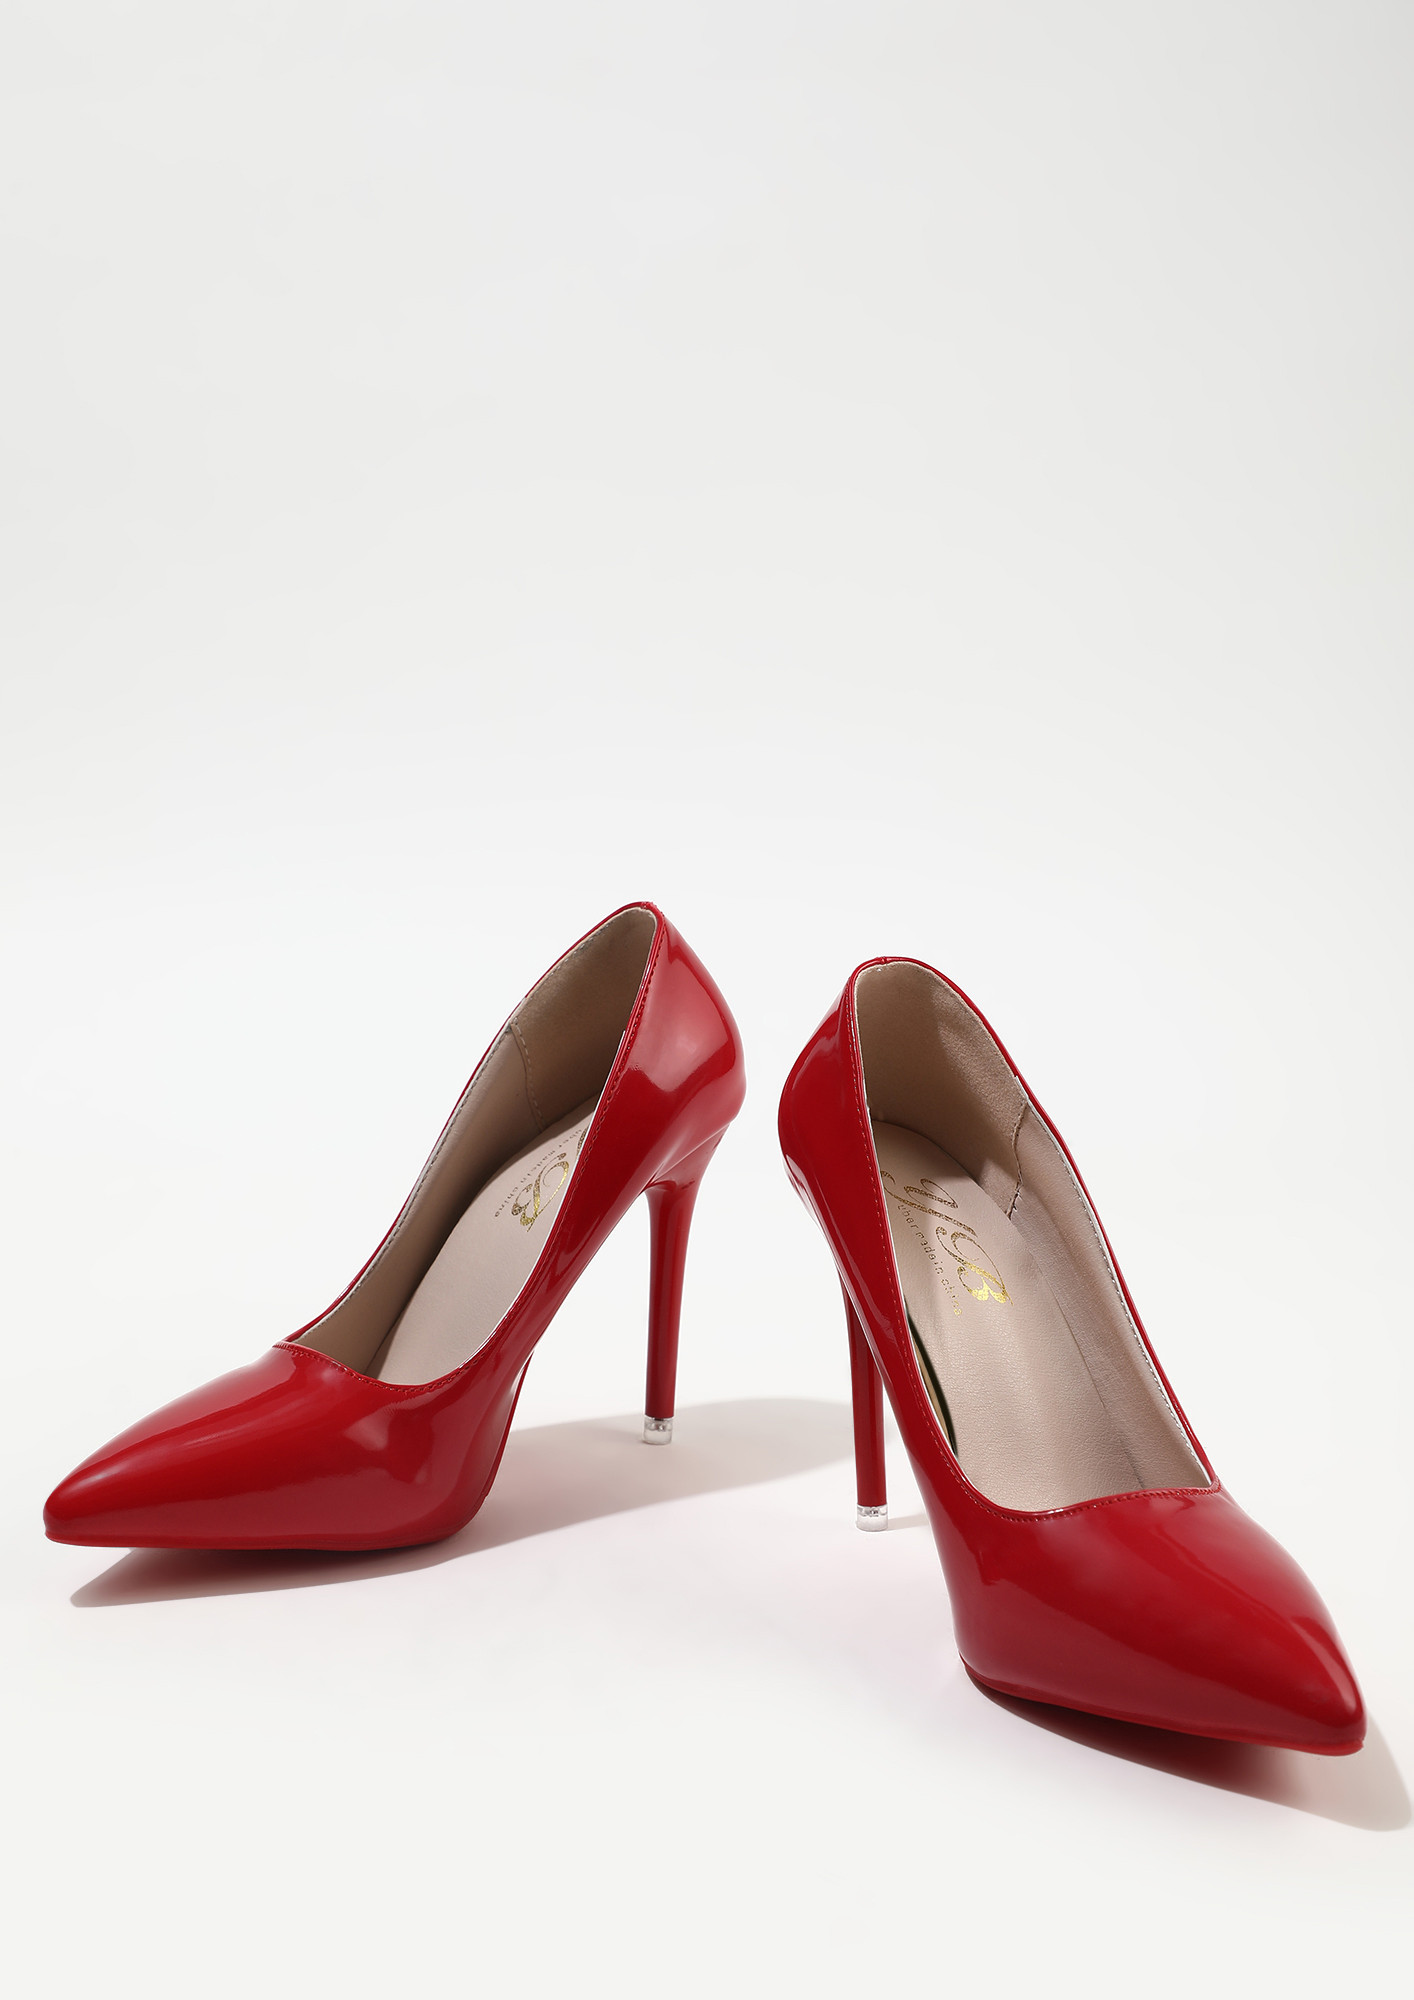 Charming Royal Red Patent Leather With Golden Stud Comfort Ladies Flut